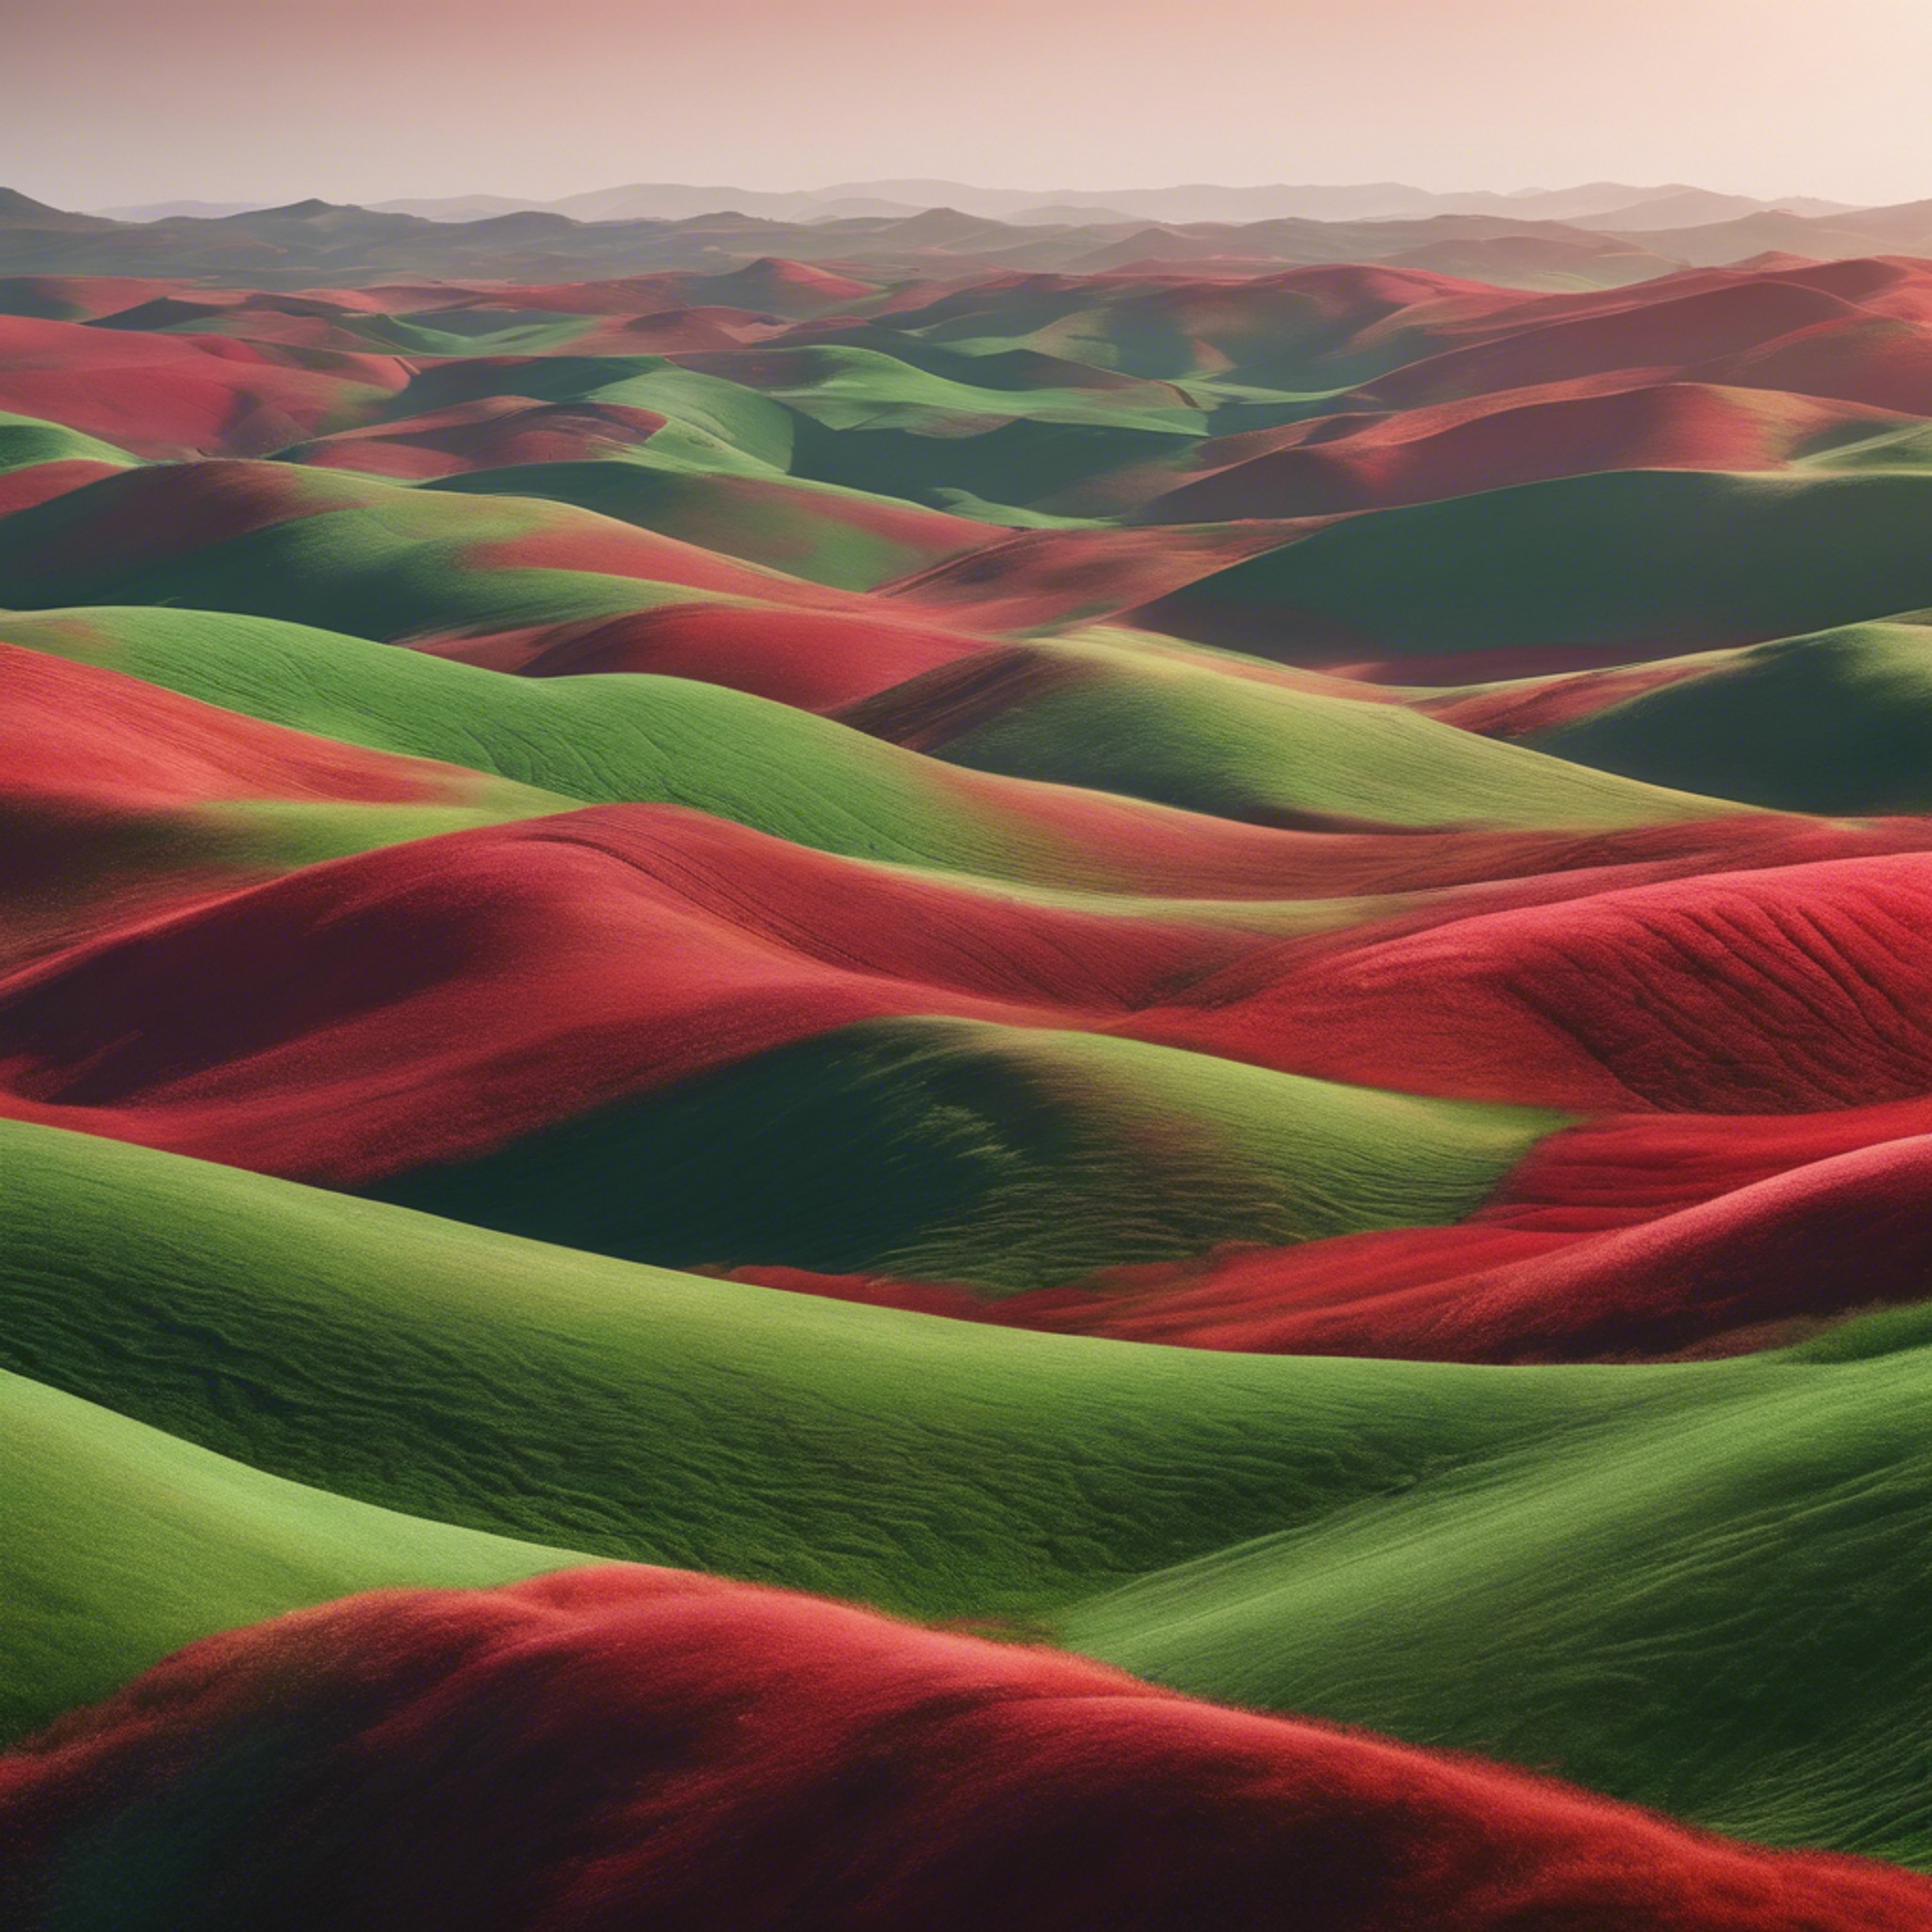 A sweeping panorama of abstract rolling hills in red and green Wallpaper[81c5da3e9ed14132829a]